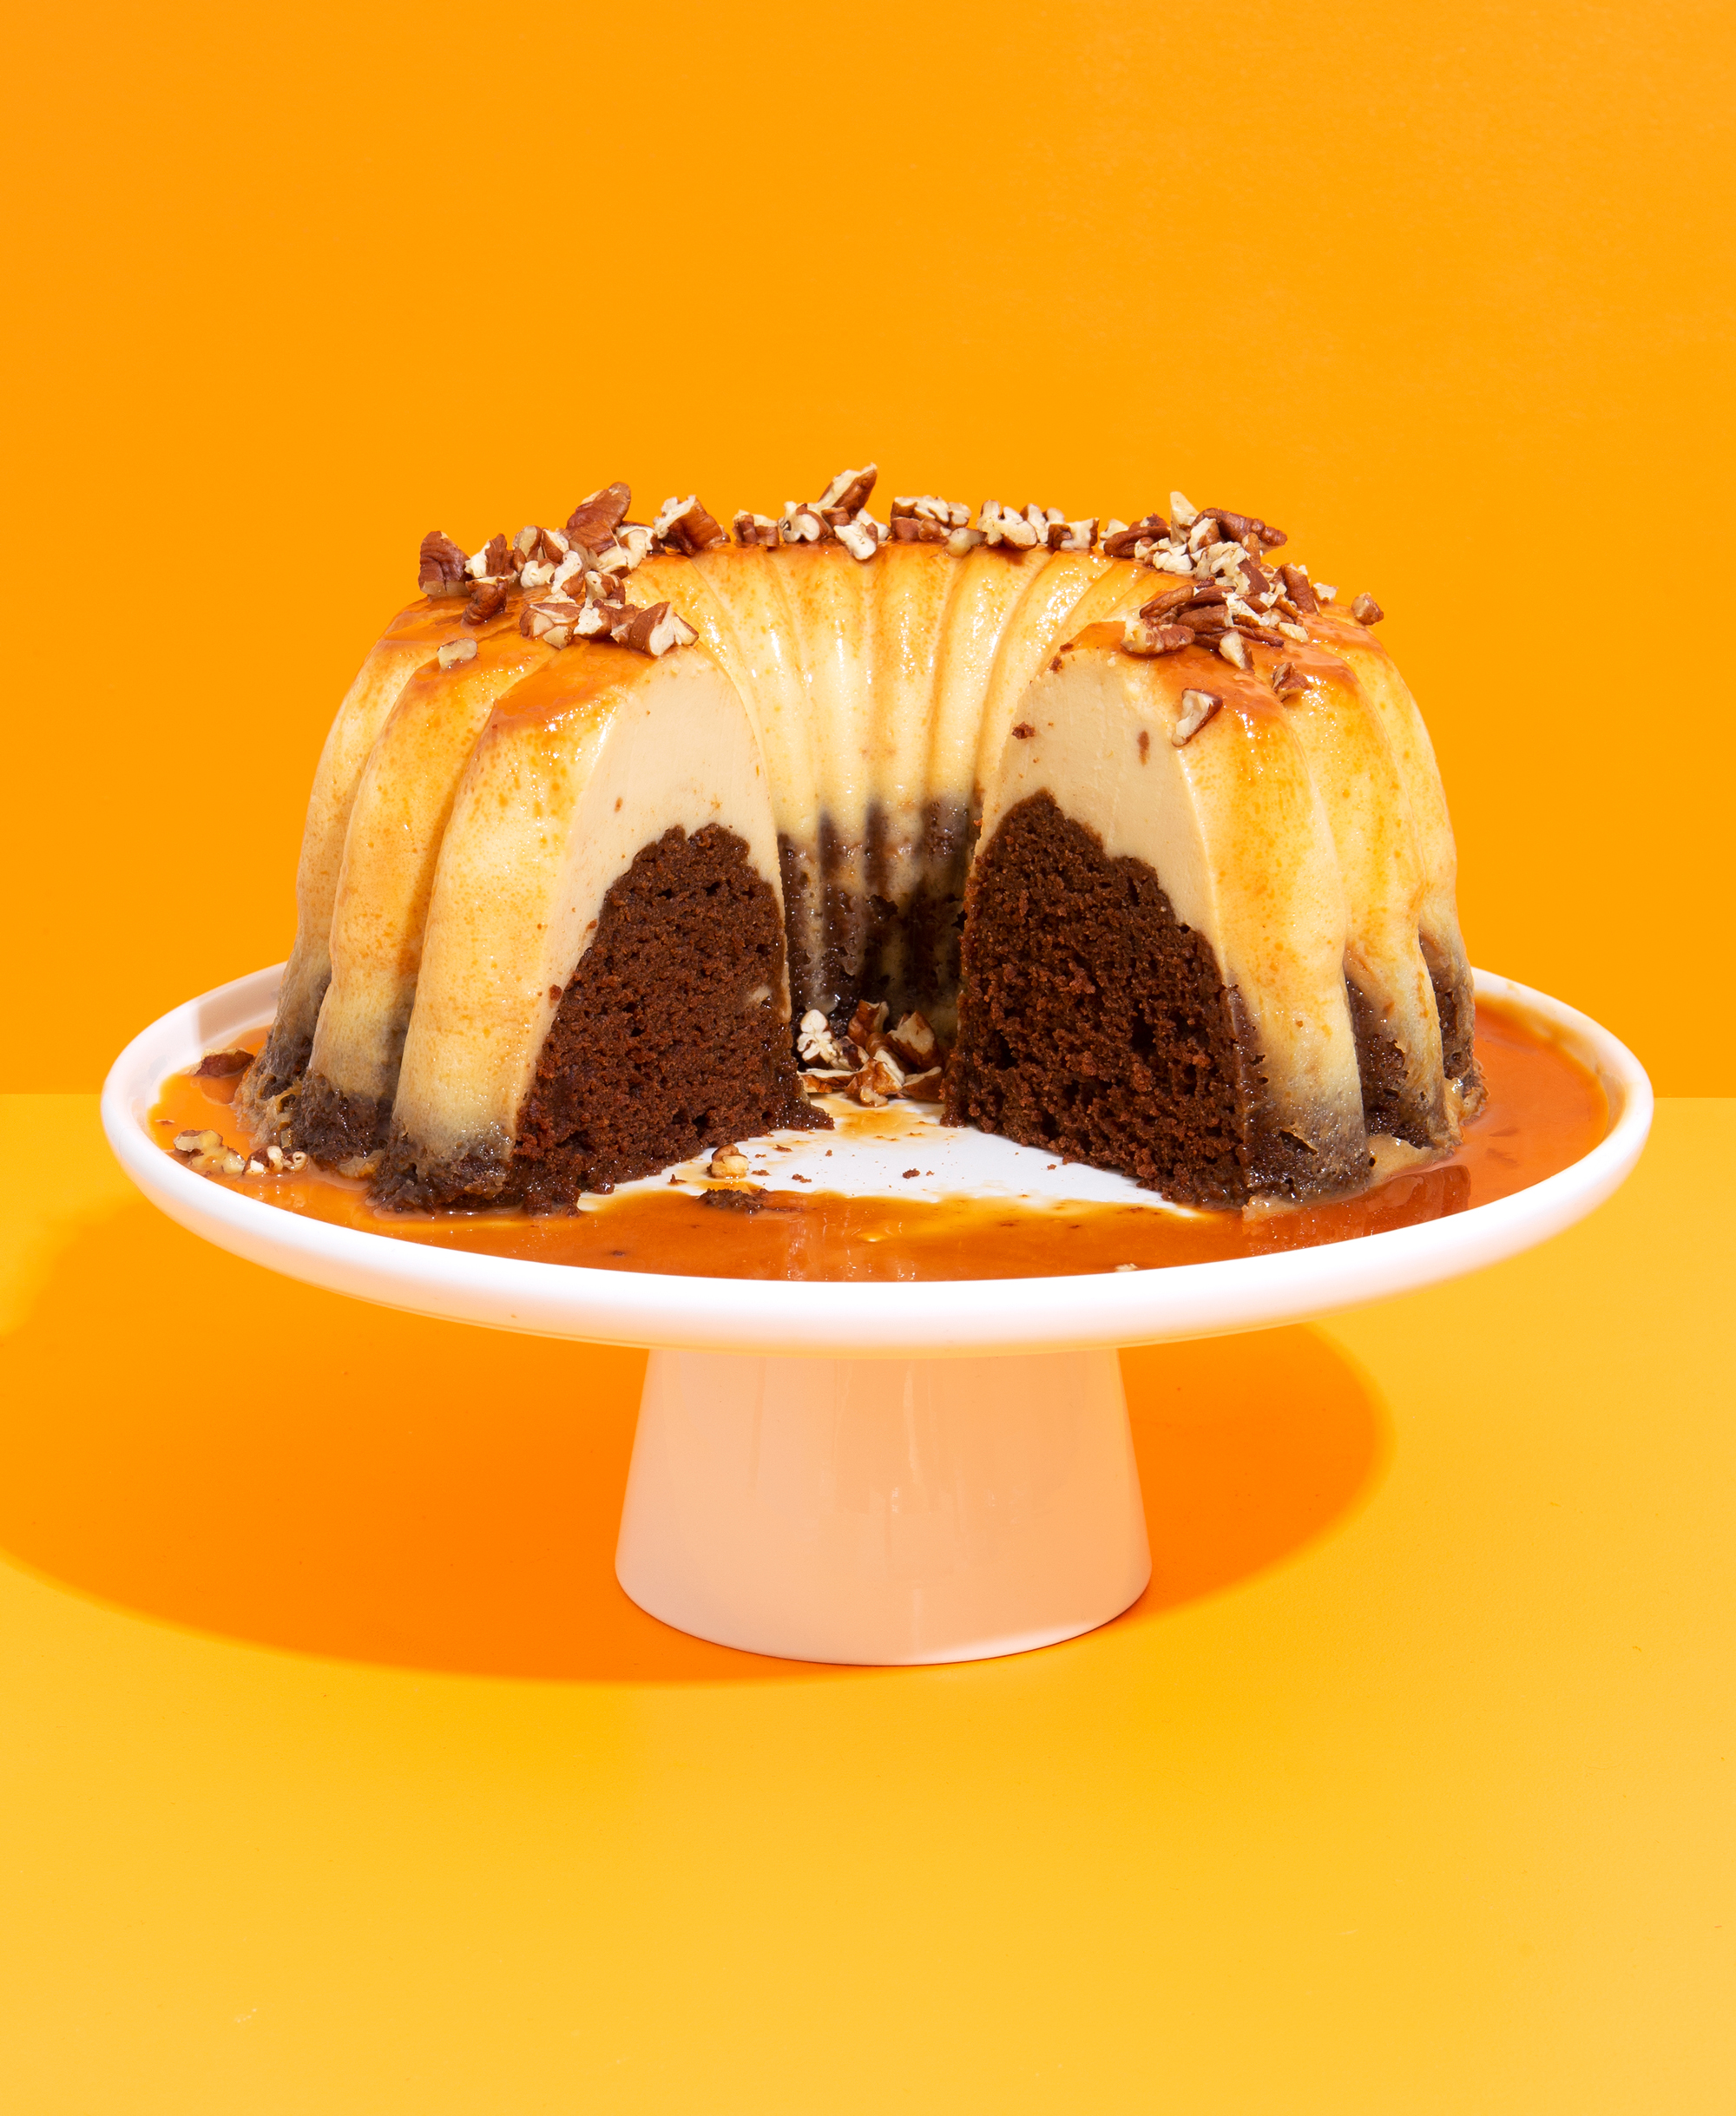 Chocoflan: Baking and Doneness Temperatures for a Baking Magic Trick